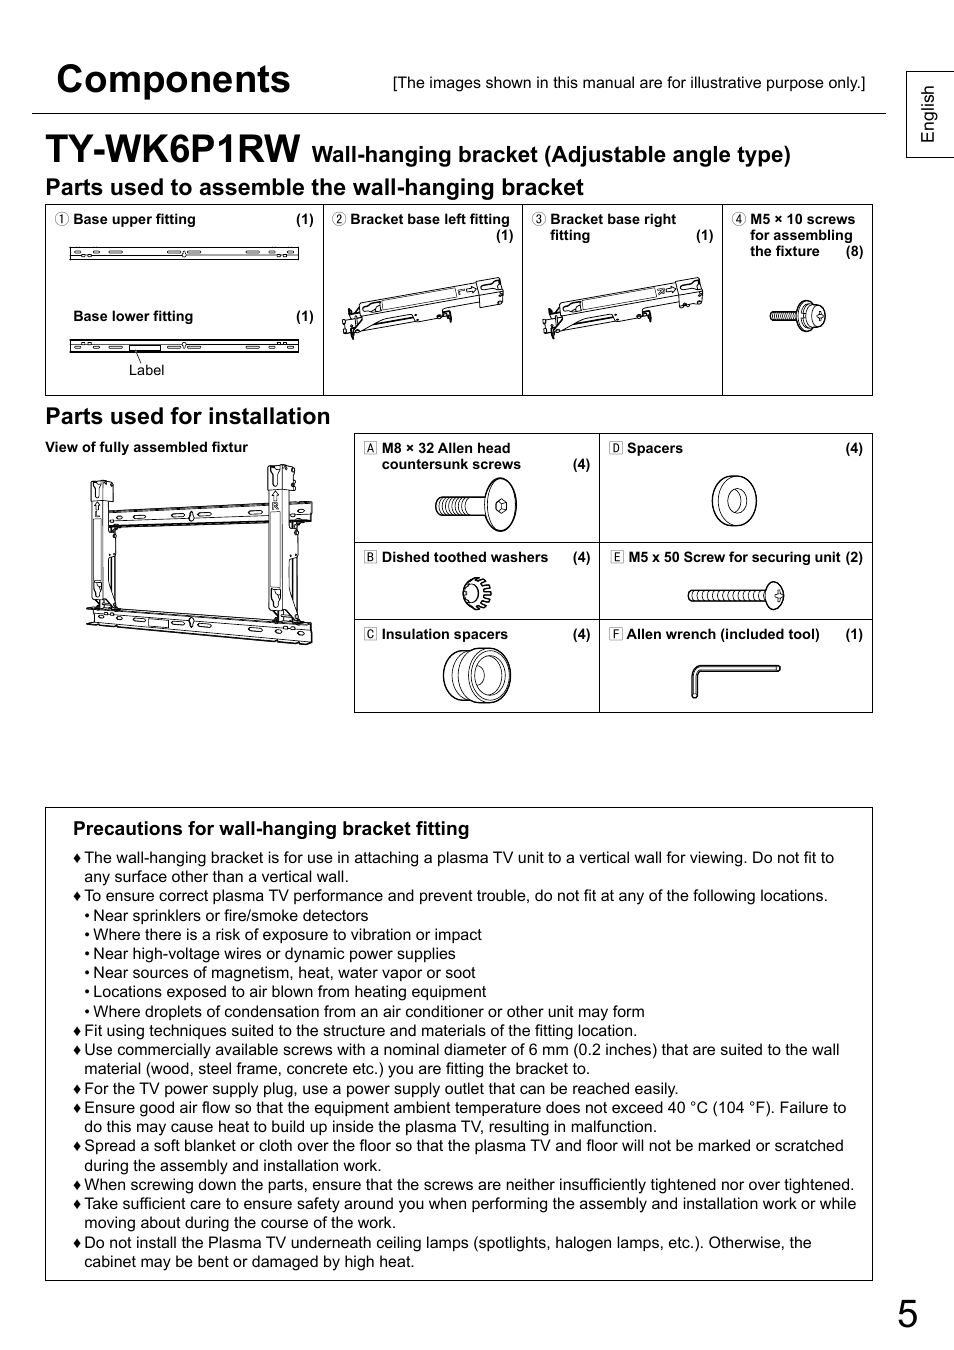 Ty-wk6p1rw, Components, Parts used to assemble the wall-hanging bracket |  Panasonic TYWK6P1RW User Manual | Page 5 / 90 | Original mode